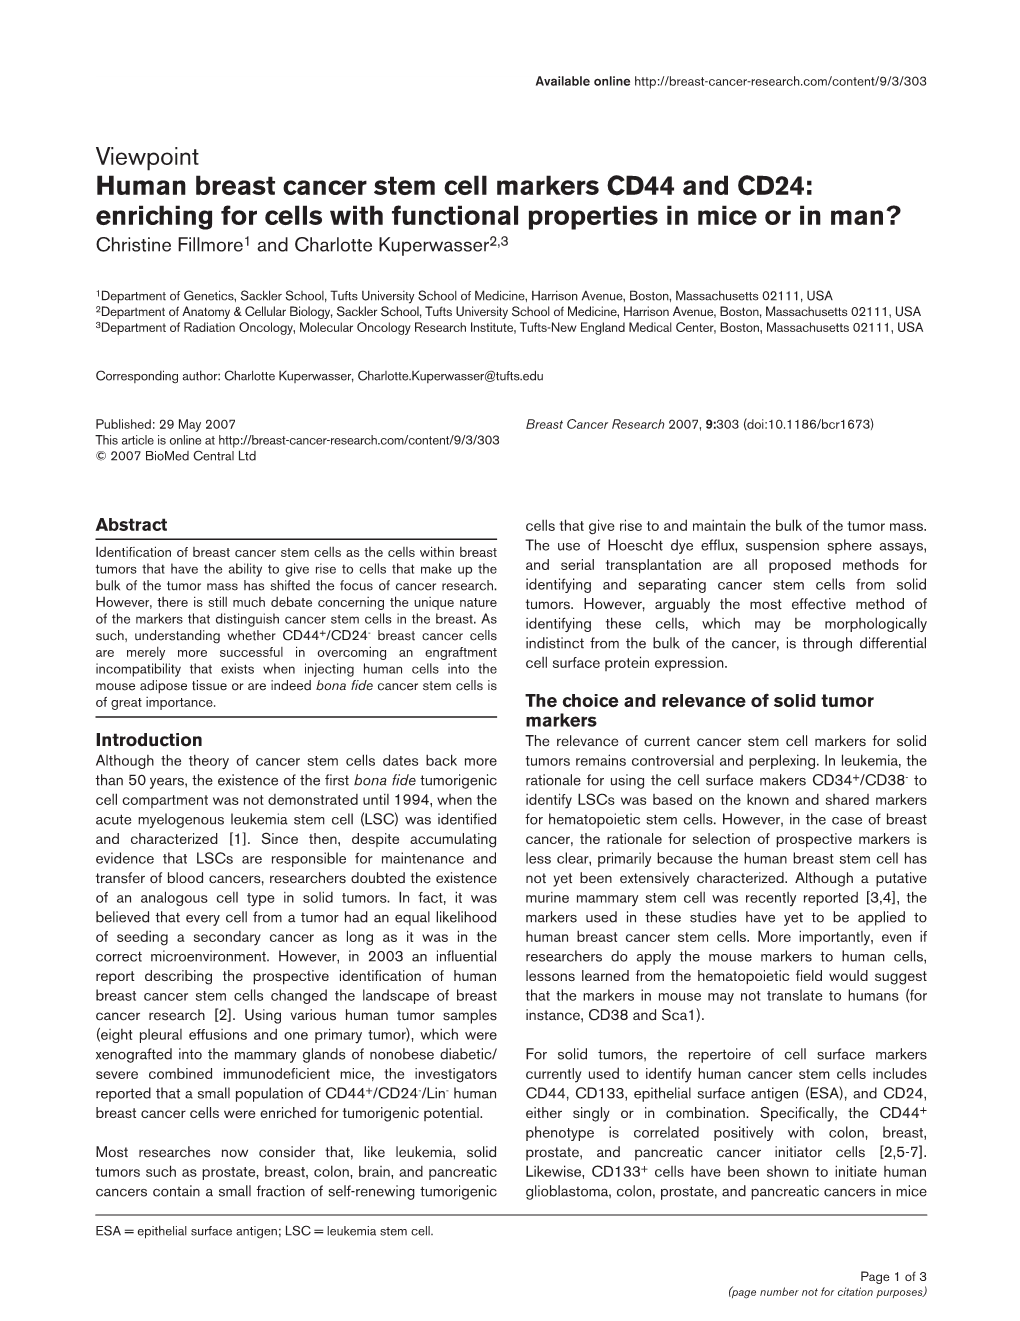 Human Breast Cancer Stem Cell Markers